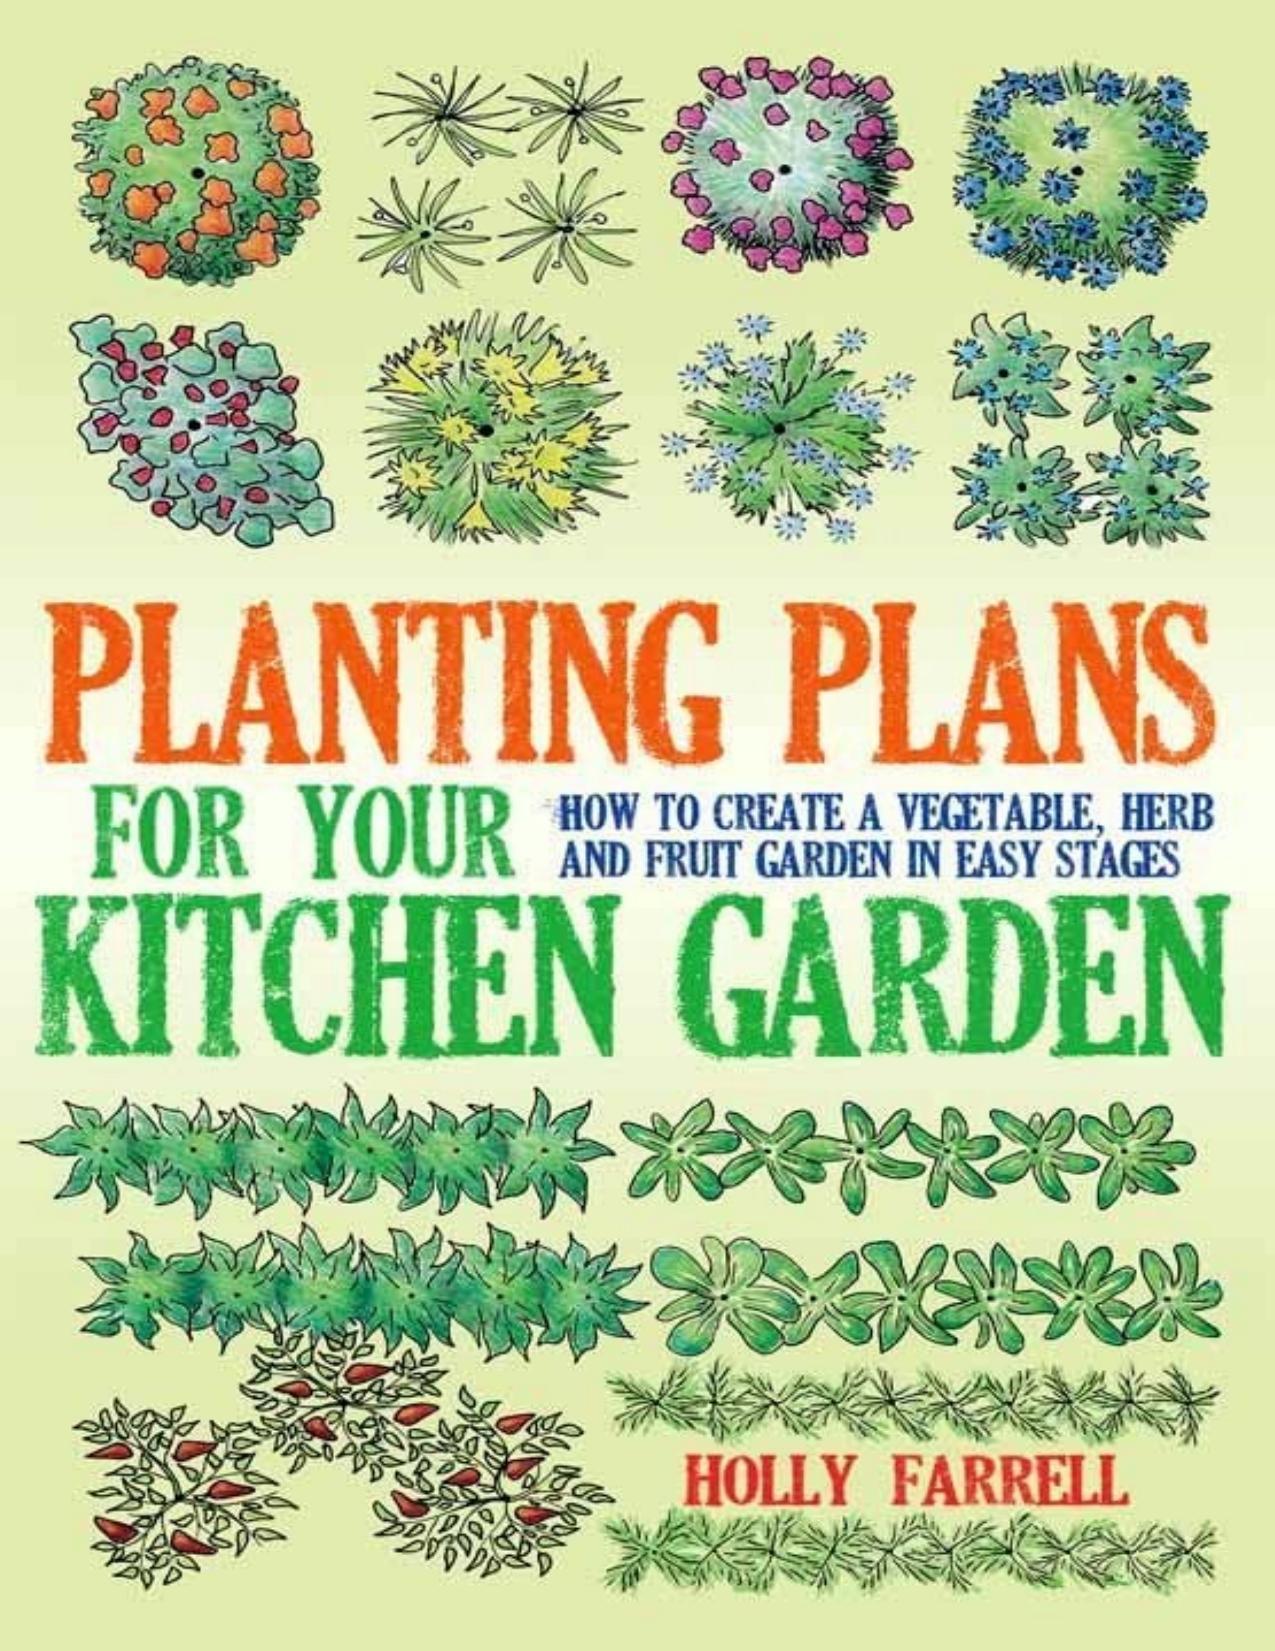 Planting Plans for Your Kitchen Garden: How to Create a Vegetable, Herb and Fruit Garden in Easy Stages - PDFDrive.com